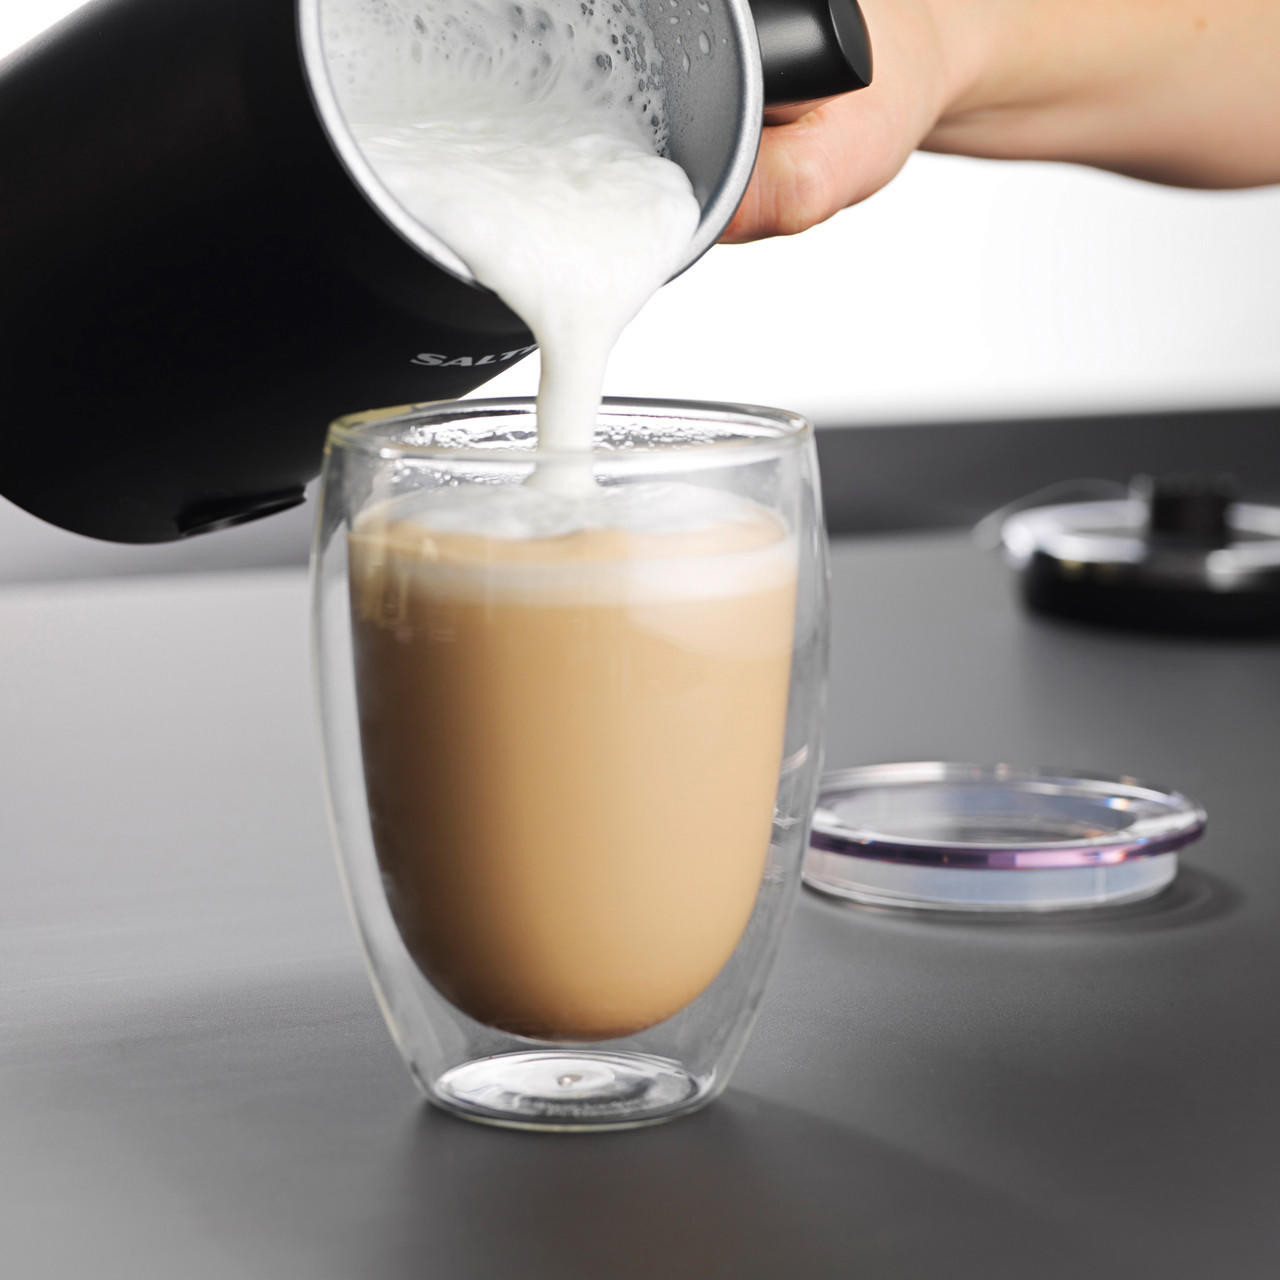 https://cdn11.bigcommerce.com/s-5vfc75n1yv/images/stencil/1280x1280/products/6667/72826/digital-coffee-maker-to-go-with-electric-milk-frother-steamer-set-360-degree-base-salter-combo-8000-5054061494020__50717.1704257895.jpg?c=1